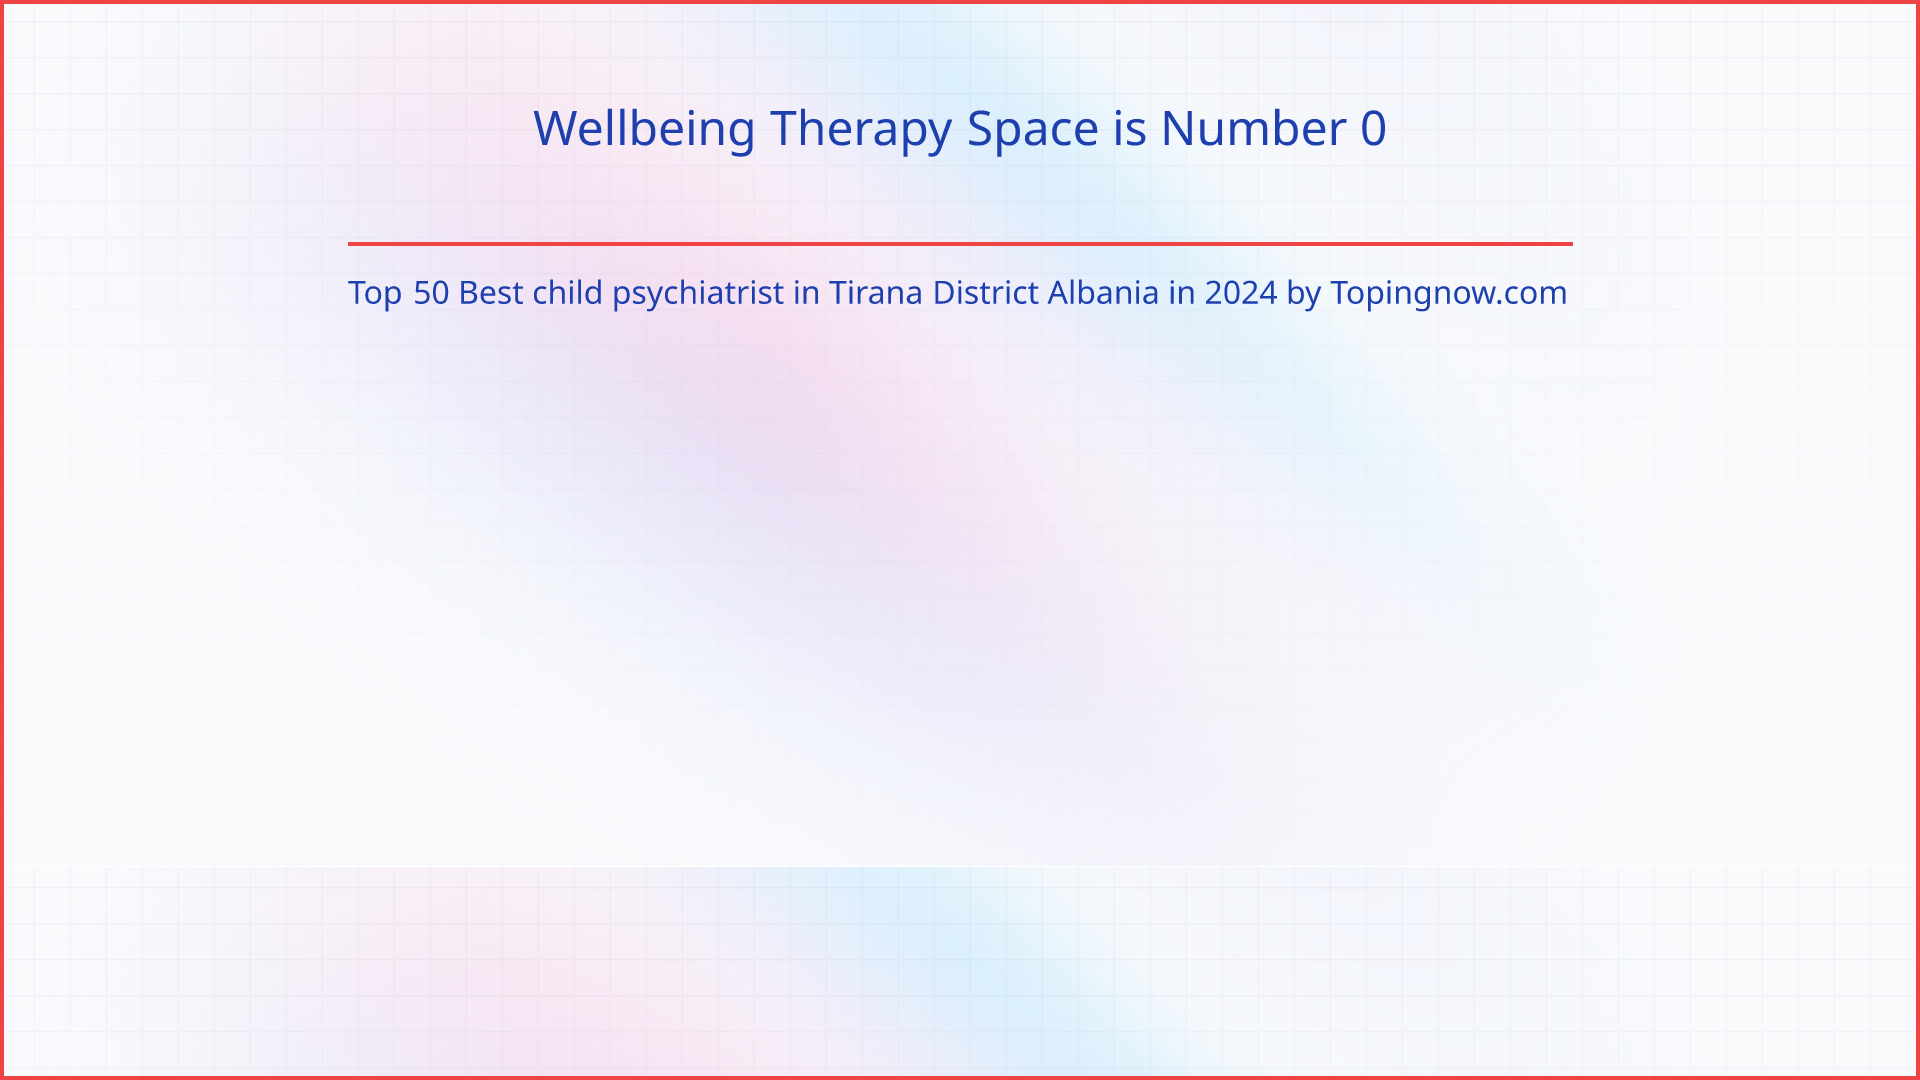 Wellbeing Therapy Space: Top 50 Best child psychiatrist in Tirana District Albania in 2024